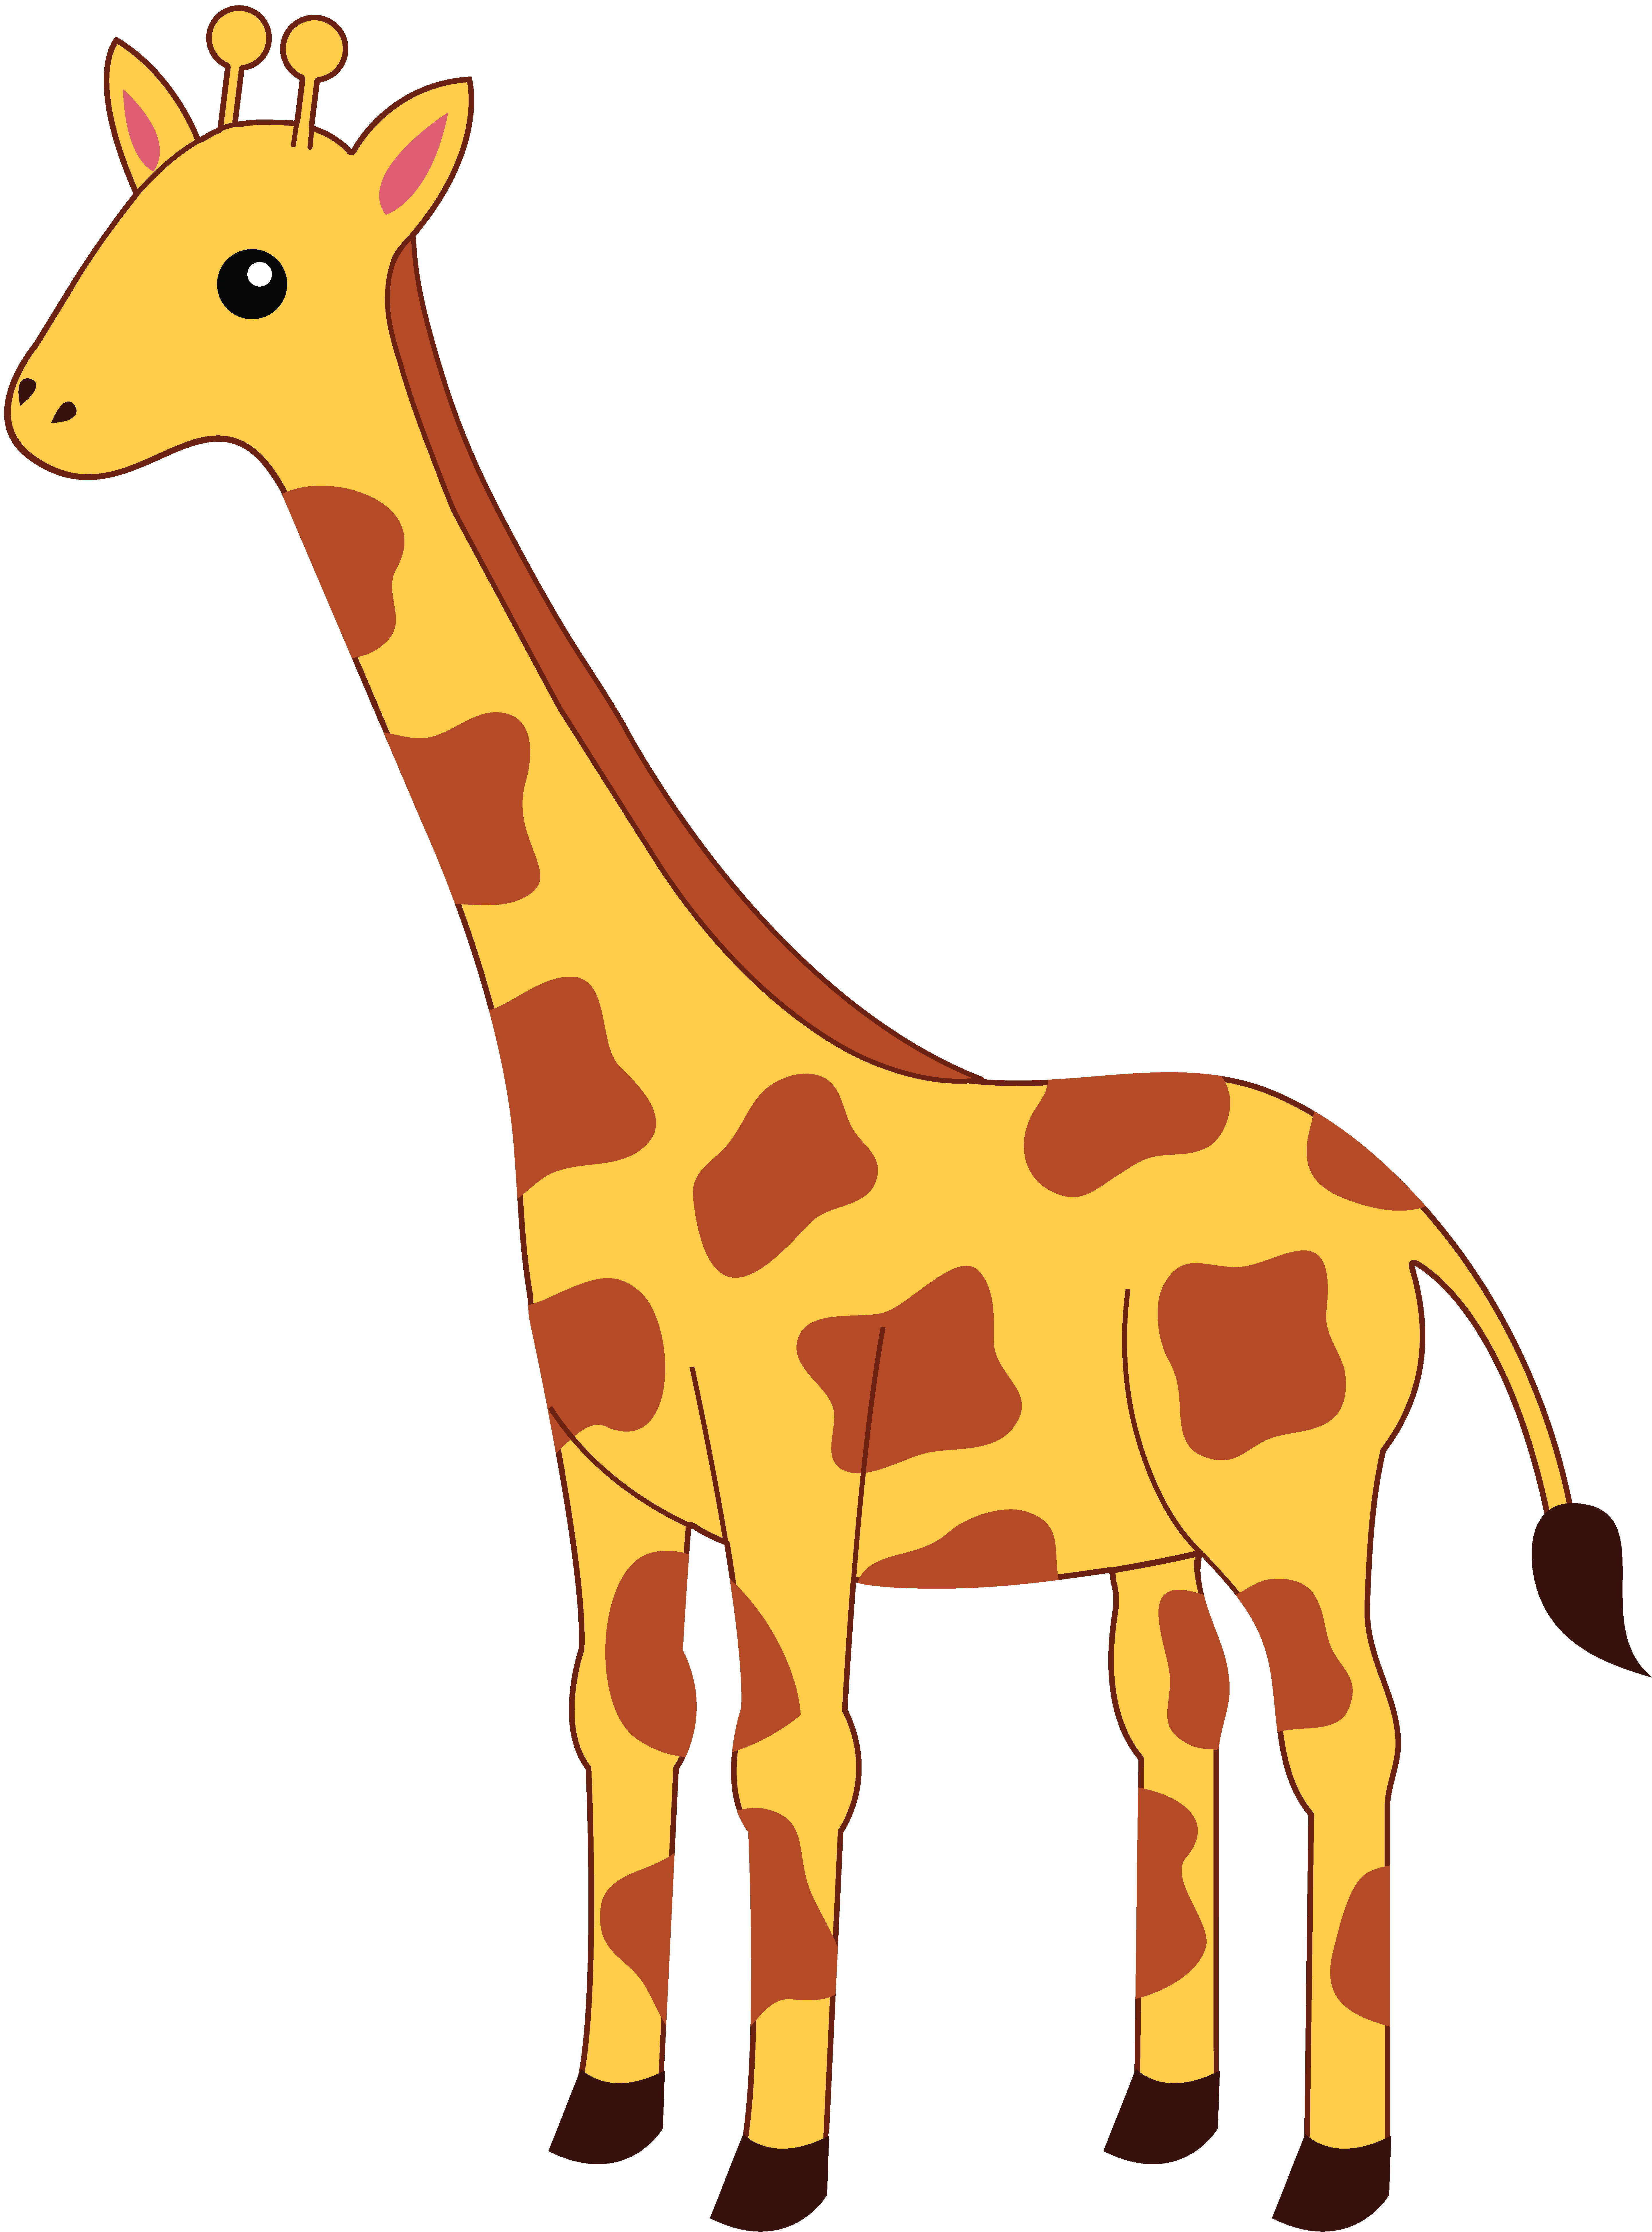 Similarfunny Pictures Giraffe Drawing Entry Cachedcartoon